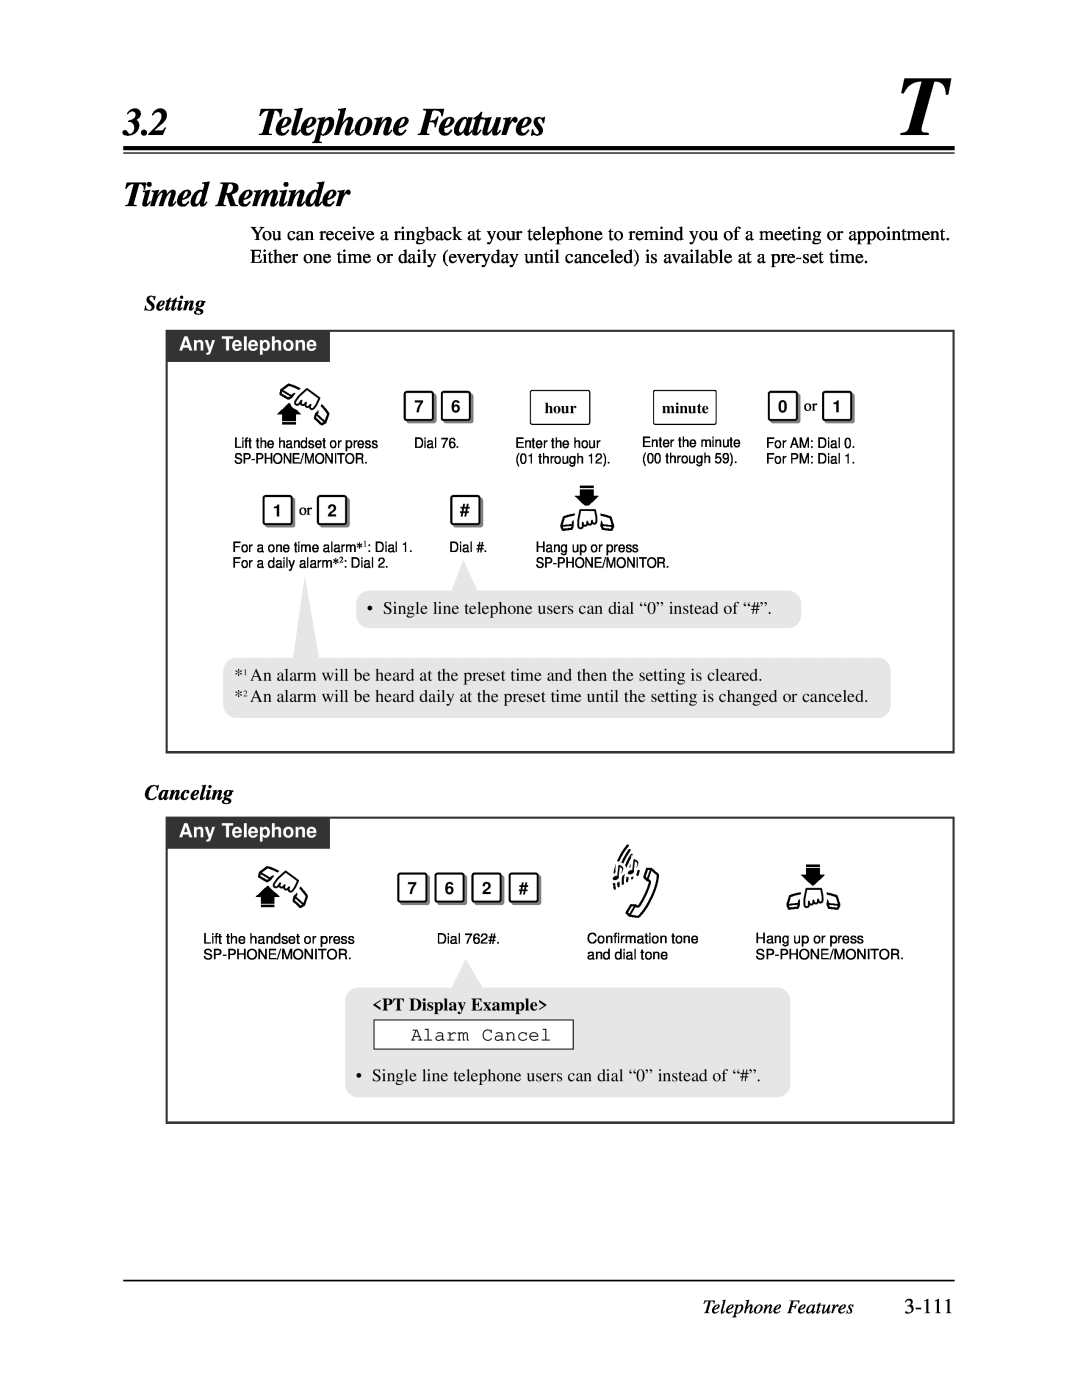 Panasonic KX-TA624 user manual Timed Reminder, 3-111, Telephone Features, Setting, Canceling, Any Telephone, 0 or, 1 or 